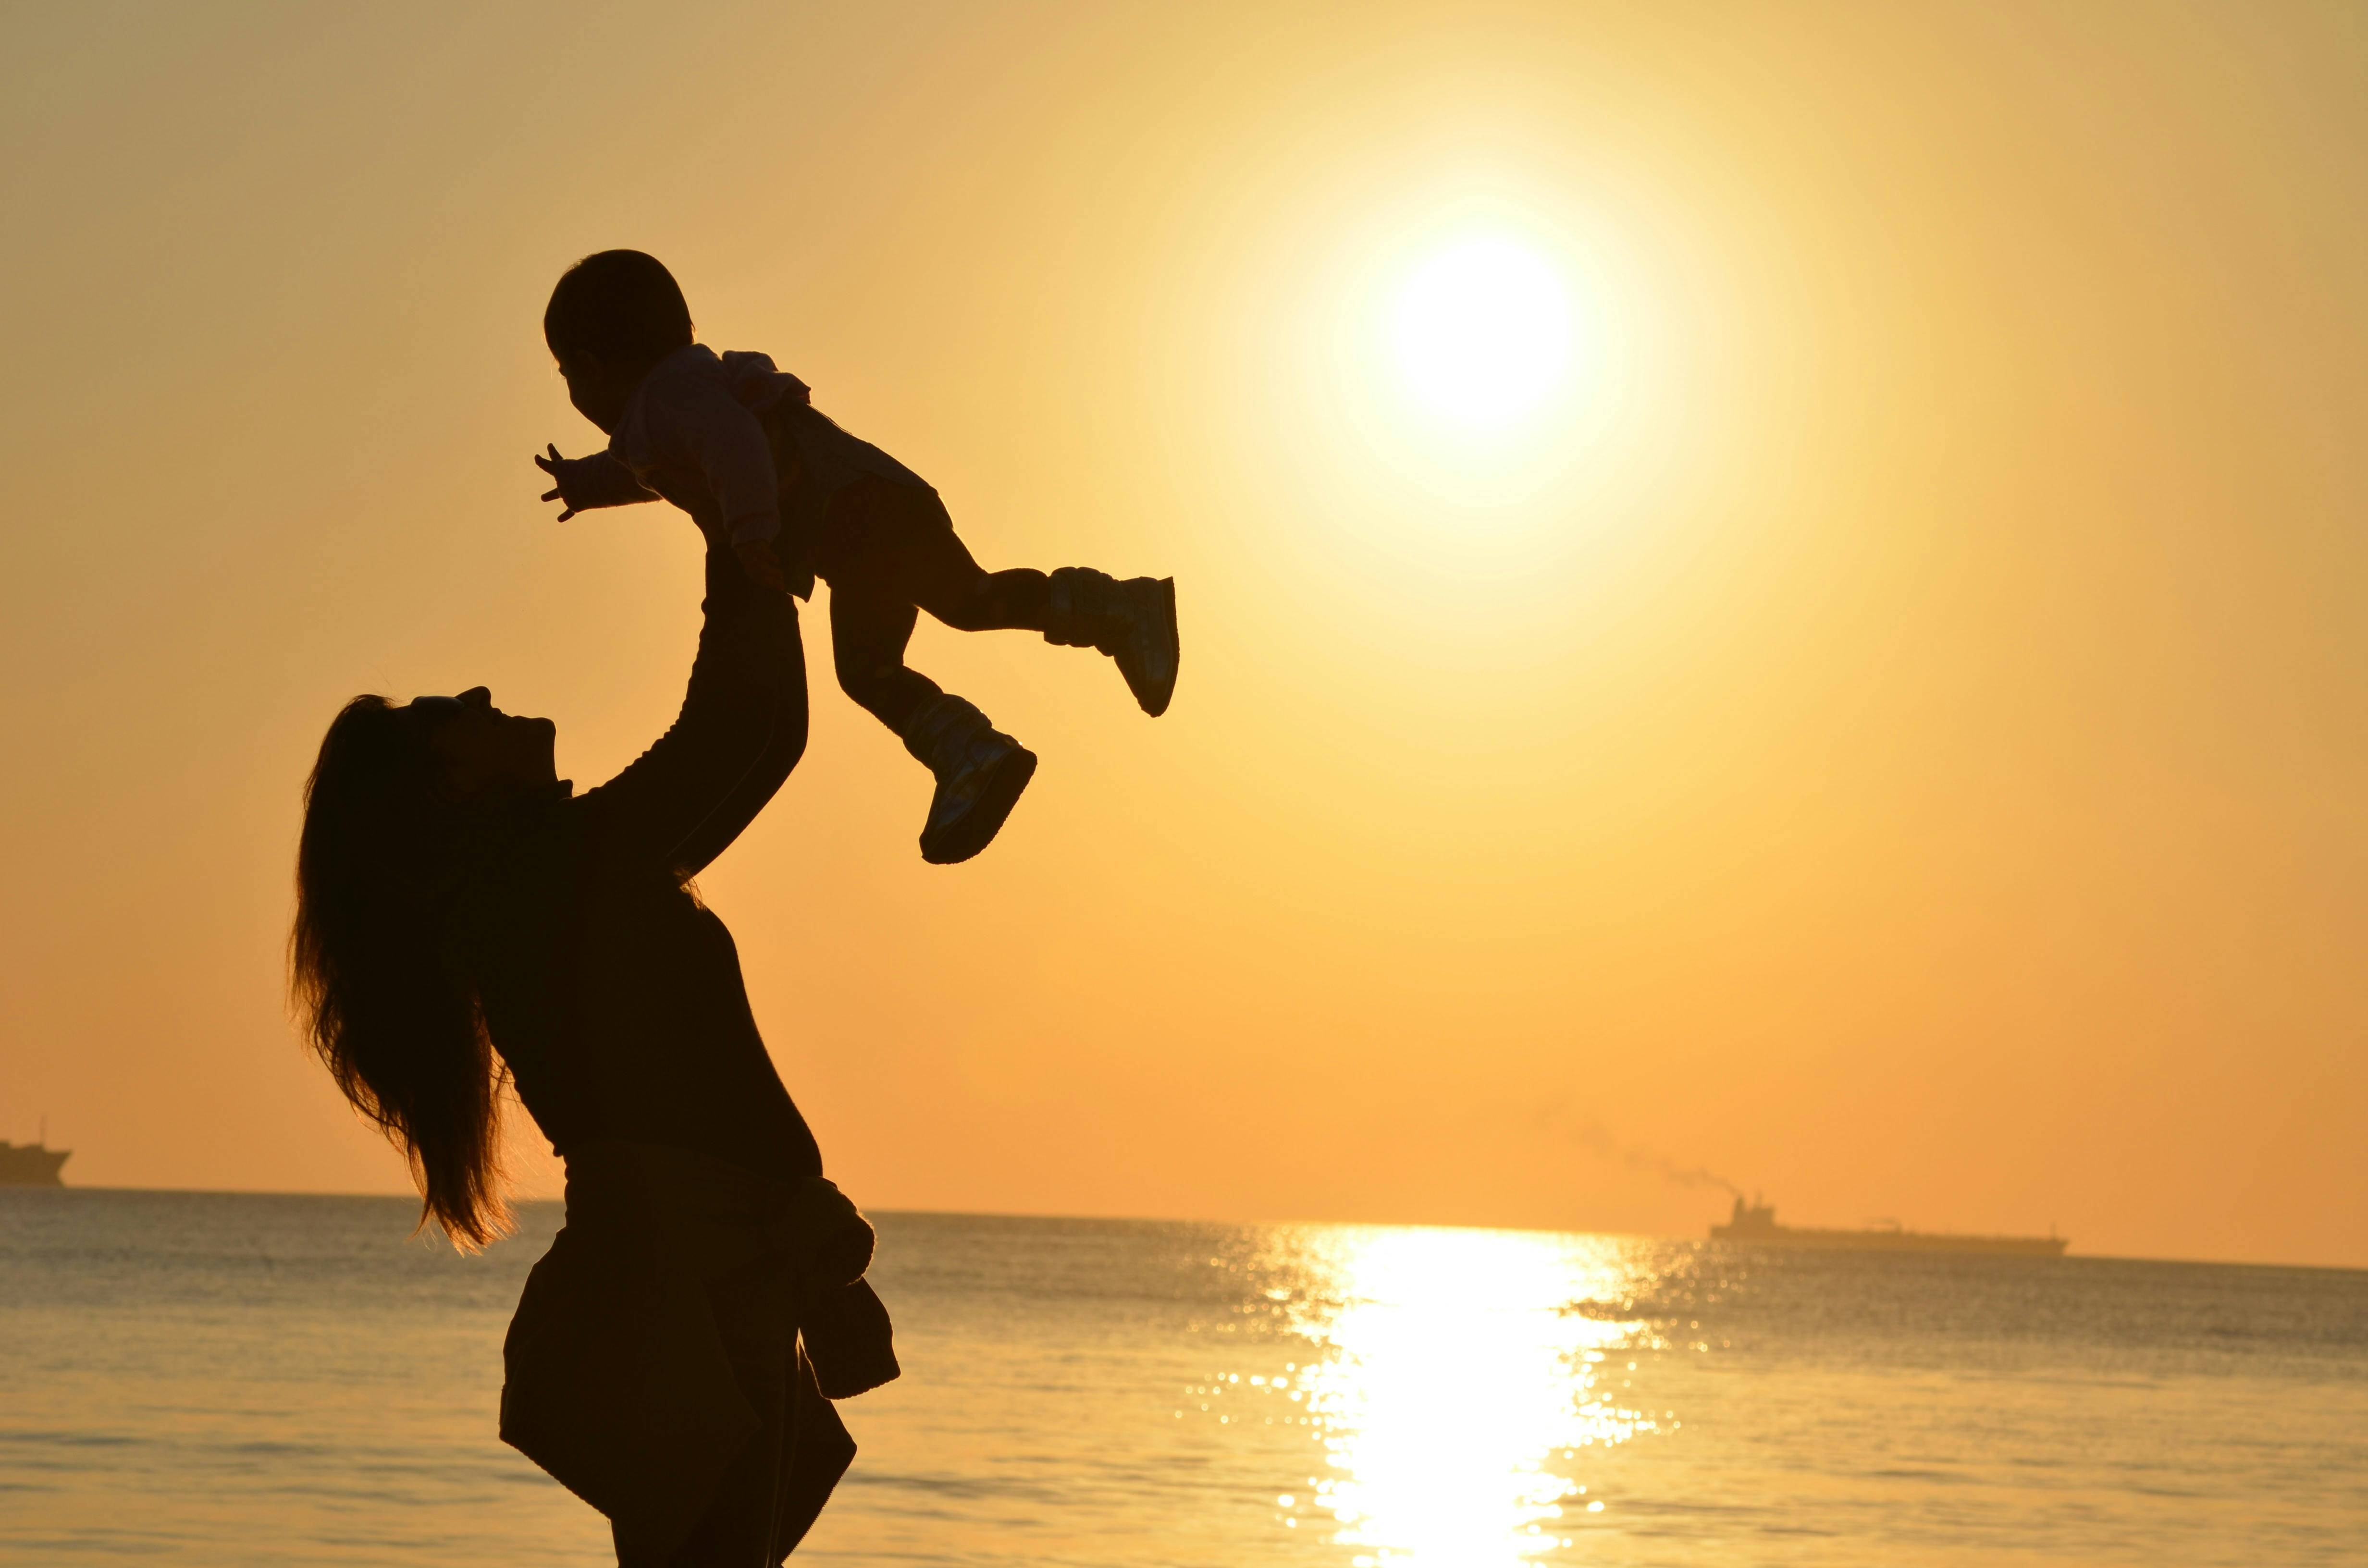 A woman lifting her baby in the air